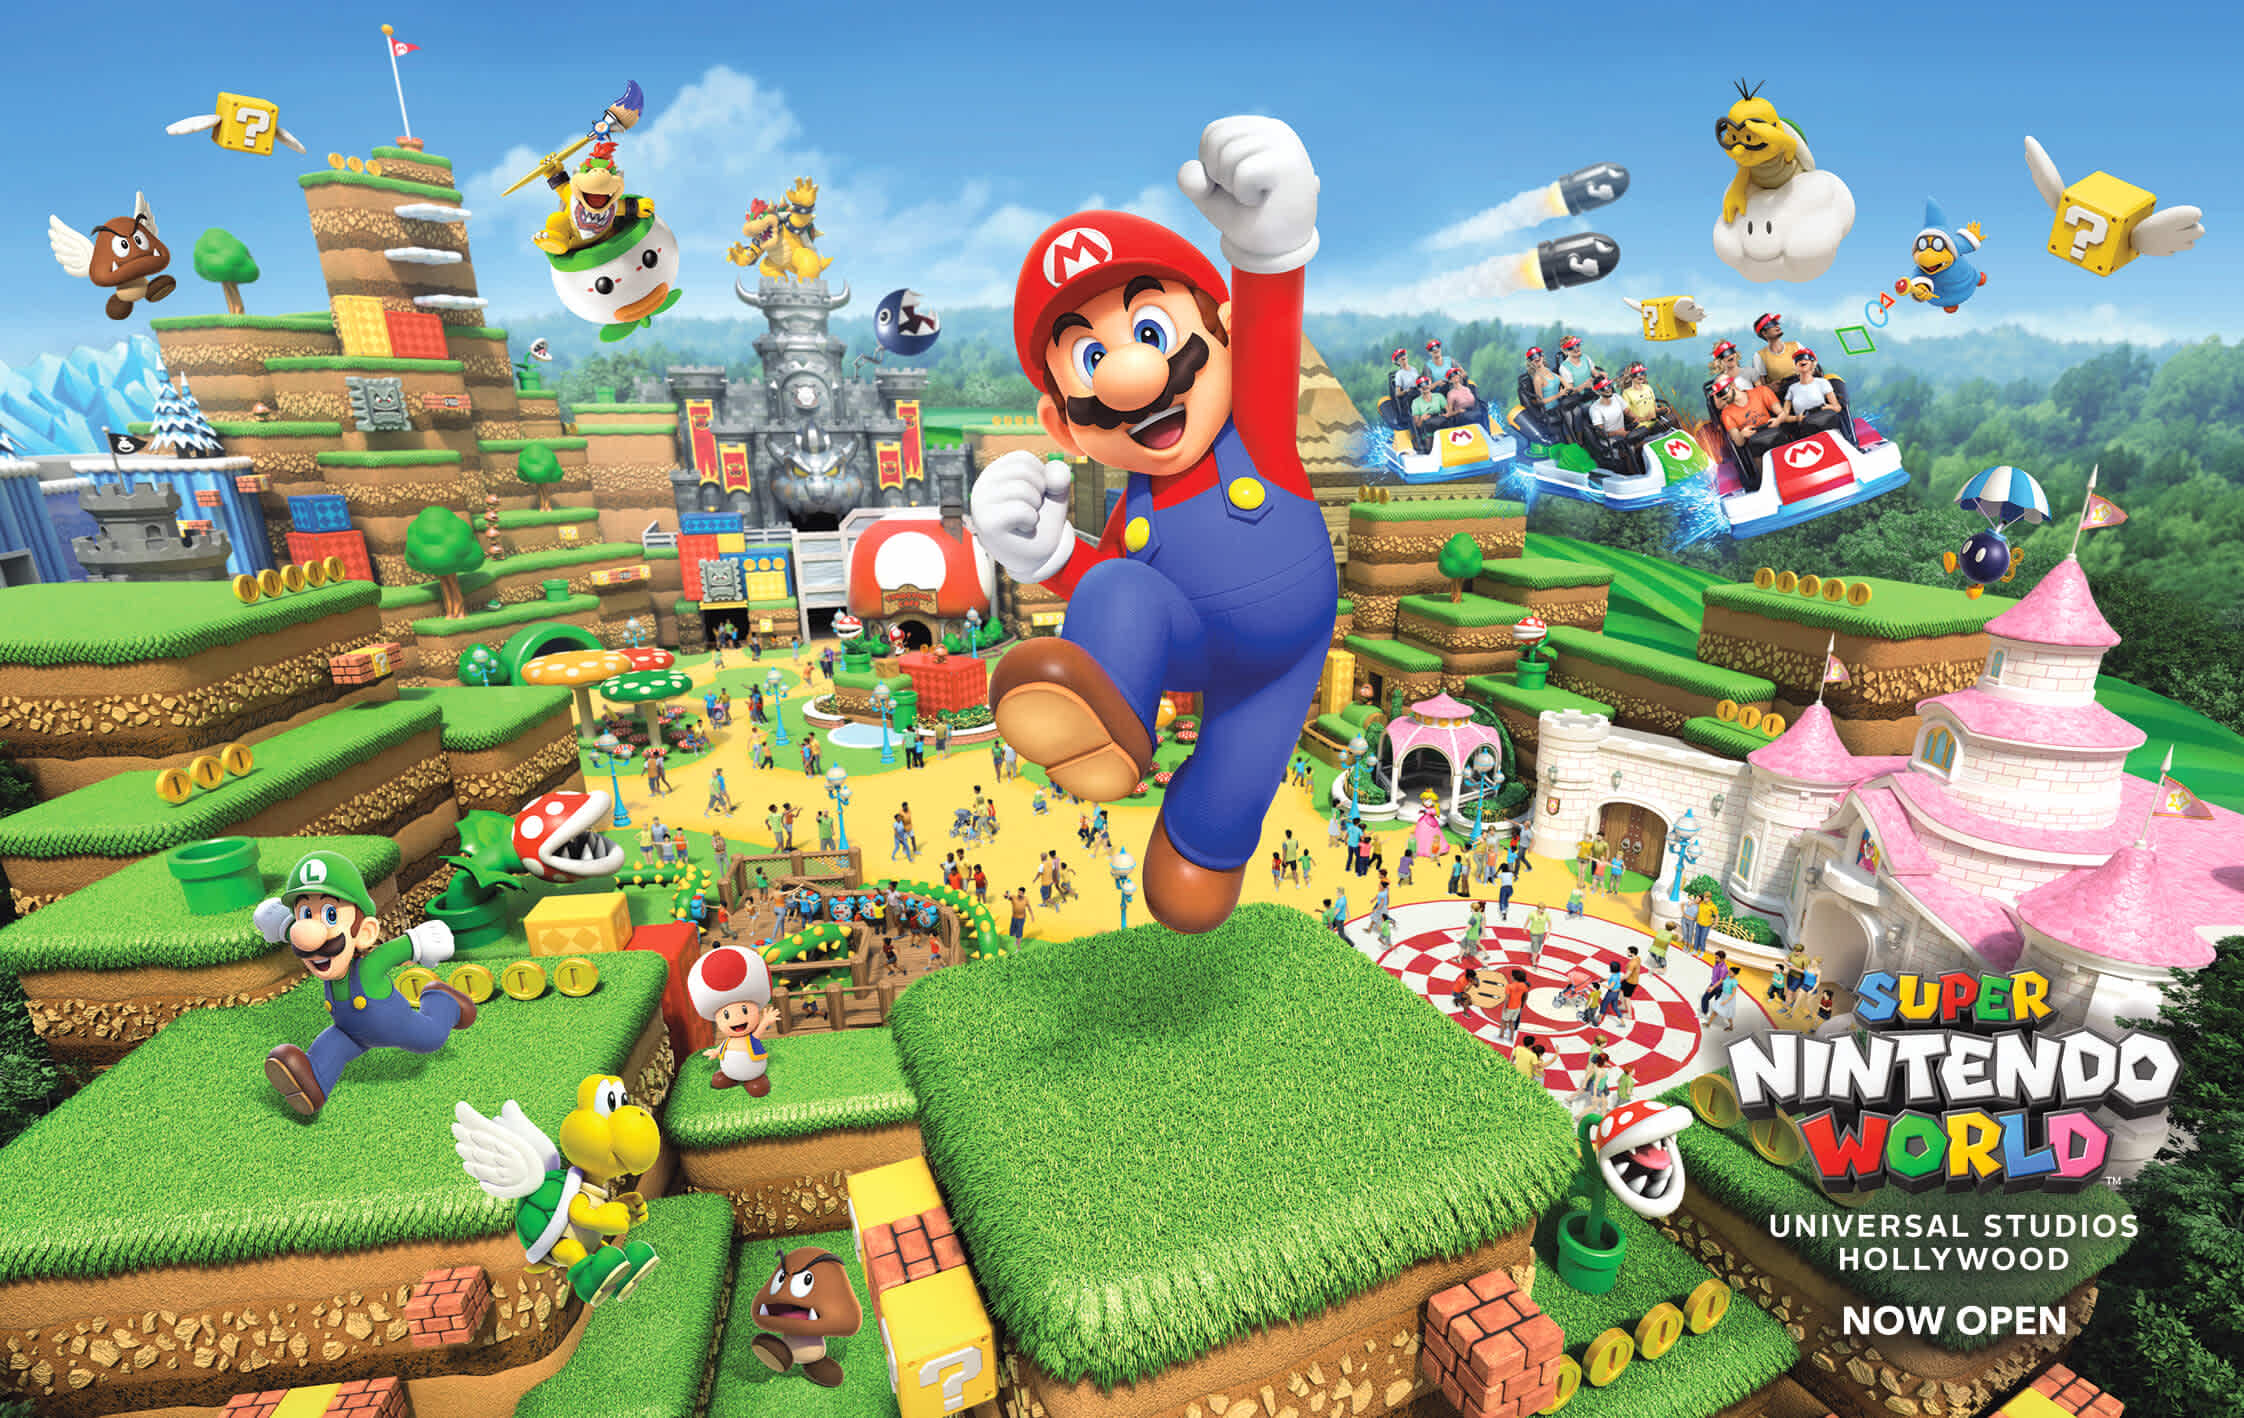 This vibrant image features the animated world of Super Nintendo. In the foreground, you can see the iconic green and brown landscapes with a variety of recognizable characters from the Nintendo franchise. Mario is energetically leaping forward in the center, wearing his traditional red cap, blue overalls, and red shirt. Luigi is seen in motion to the left, while characters like Toad, Yoshi, and a Koopa Troopa are scattered throughout the scene. Various elements, such as question blocks, coins, and power-up mushrooms, add to the game-like atmosphere.

The middle area of the image shows an intricately designed park with pathways, where several visitors can be seen exploring the attractions. The park is elaborately themed with large, mushroom-shaped structures and checkered flooring reminiscent of racing tracks.

The background displays a brilliant blue sky with fluffy clouds and animated elements such as the floating faces of Bowser and a Boo, among others. Visitors are also seen enjoying what appears to be a water ride featuring characters in rafts, adding to the playful and adventurous vibe of the park.

A large, bold logo of "SUPER NINTENDO WORLD" adorns the bottom right corner of the image, announcing its presence at Universal Studios Hollywood, with text underneath stating "NOW OPEN."

To wrap this up, escape into this colorful and whimsical playground at Super Nintendo World, and remember at FunEx.com, we're committed to offering discounts that'll ensure you get the most savings on your tickets for the lowest